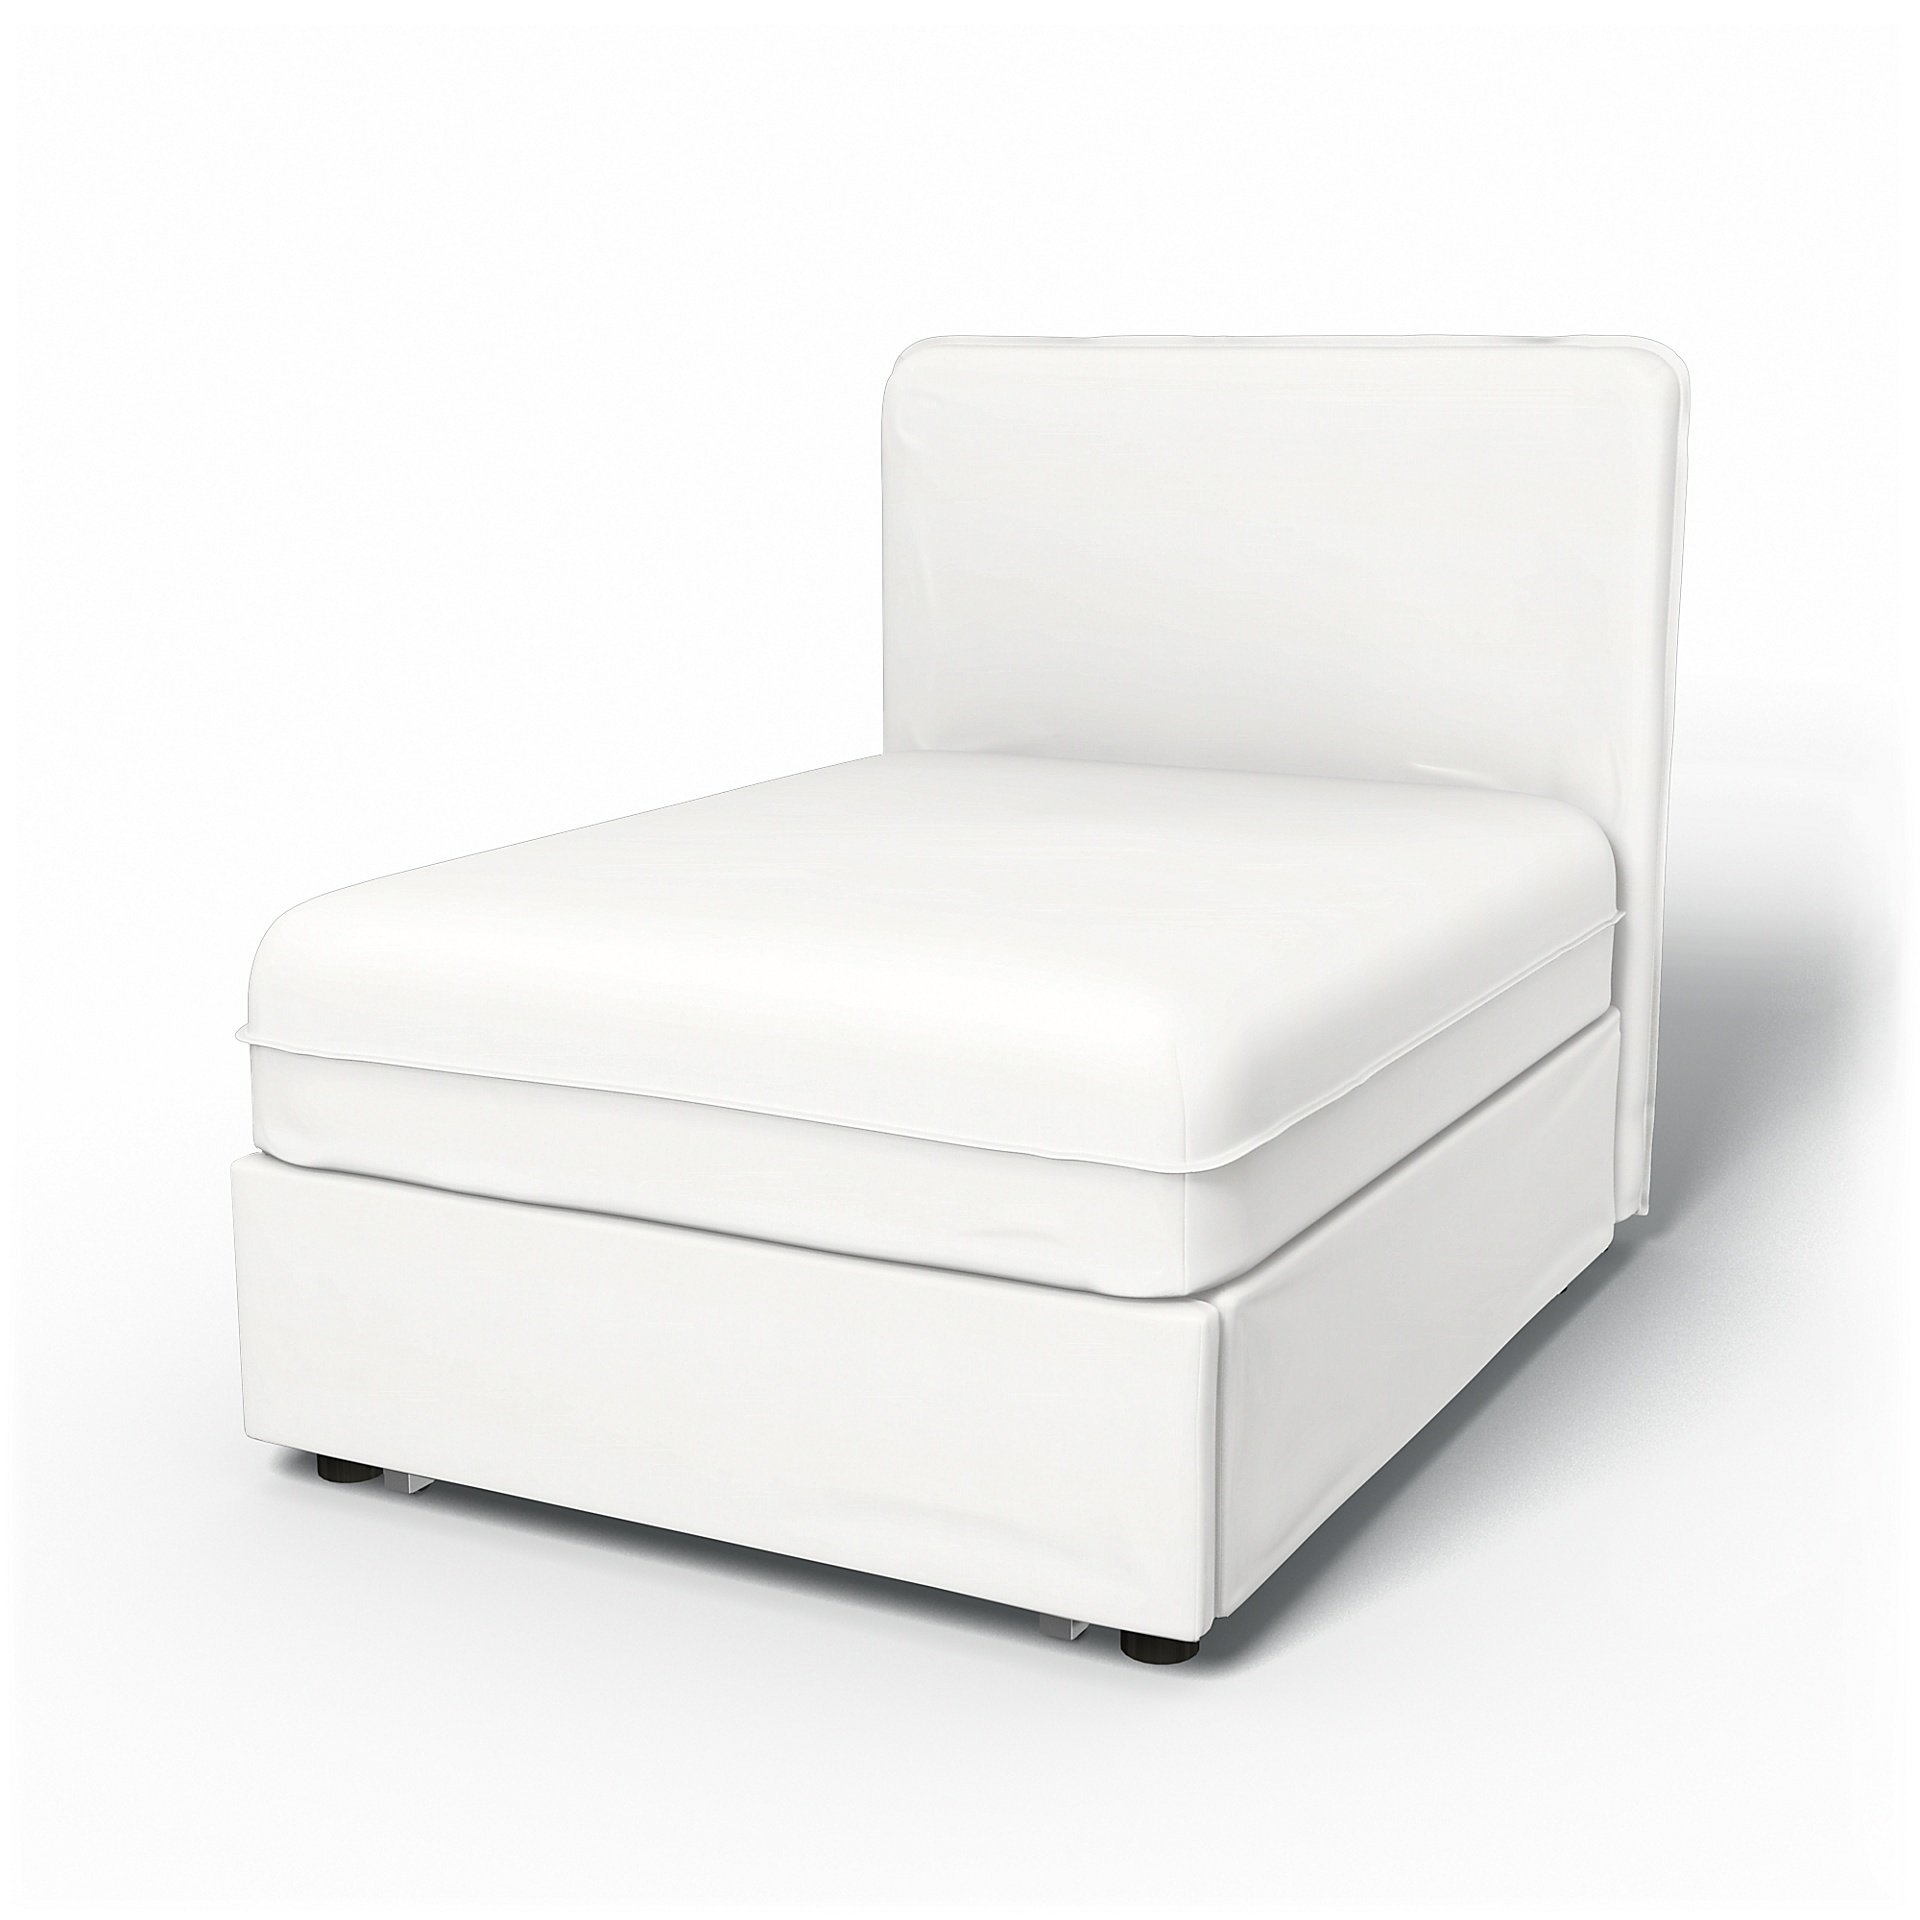 IKEA - Vallentuna Seat Module with Low Back Sofa Bed Cover 80x100 cm 32x39in, Absolute White, Linen 